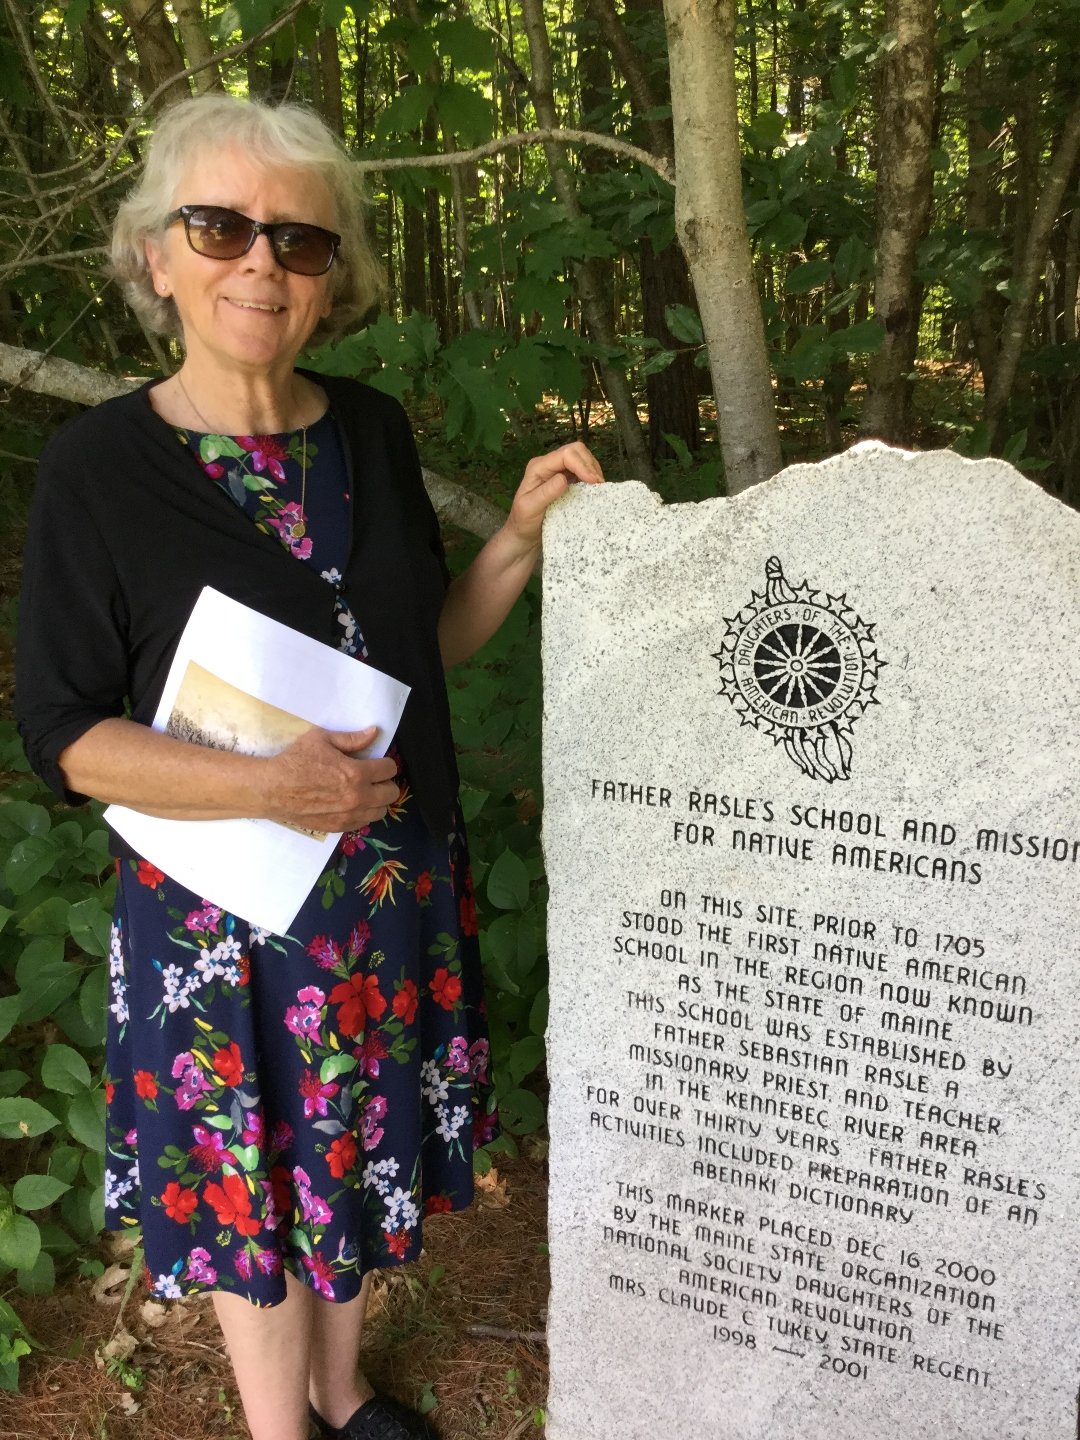 Kathryn Swegart standing next to historical marker about Fr. Rale